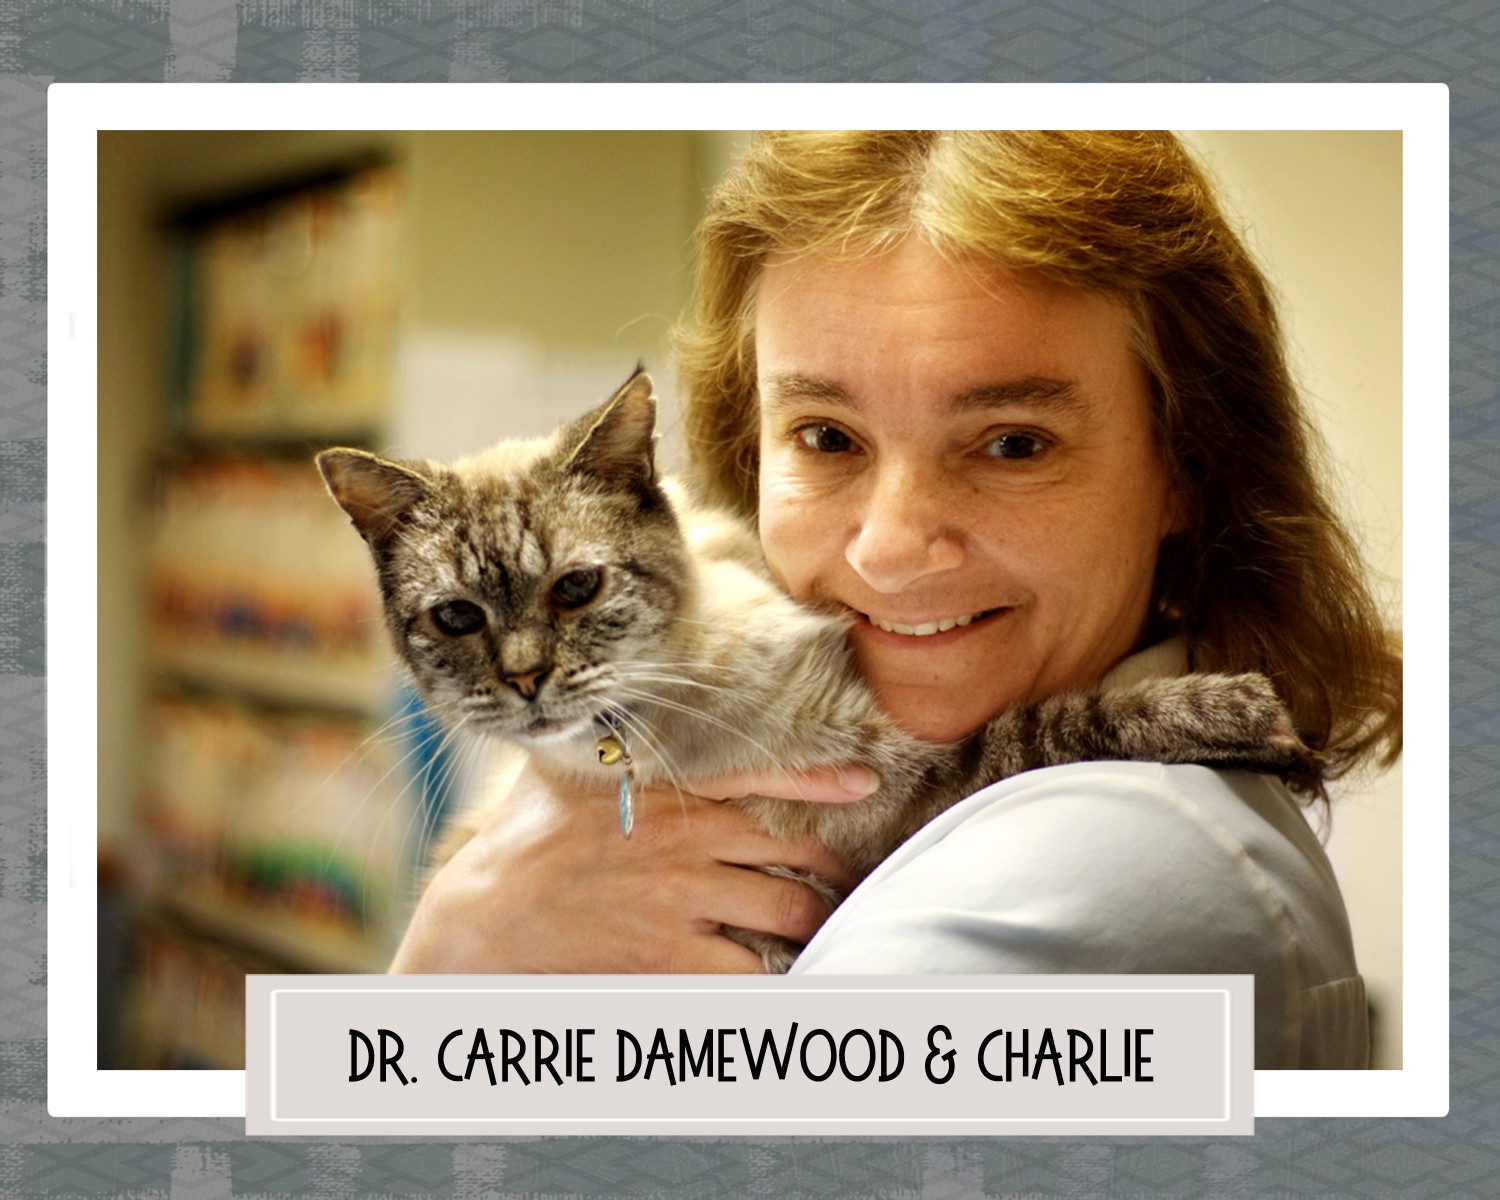 Dr. Carrie Damewood